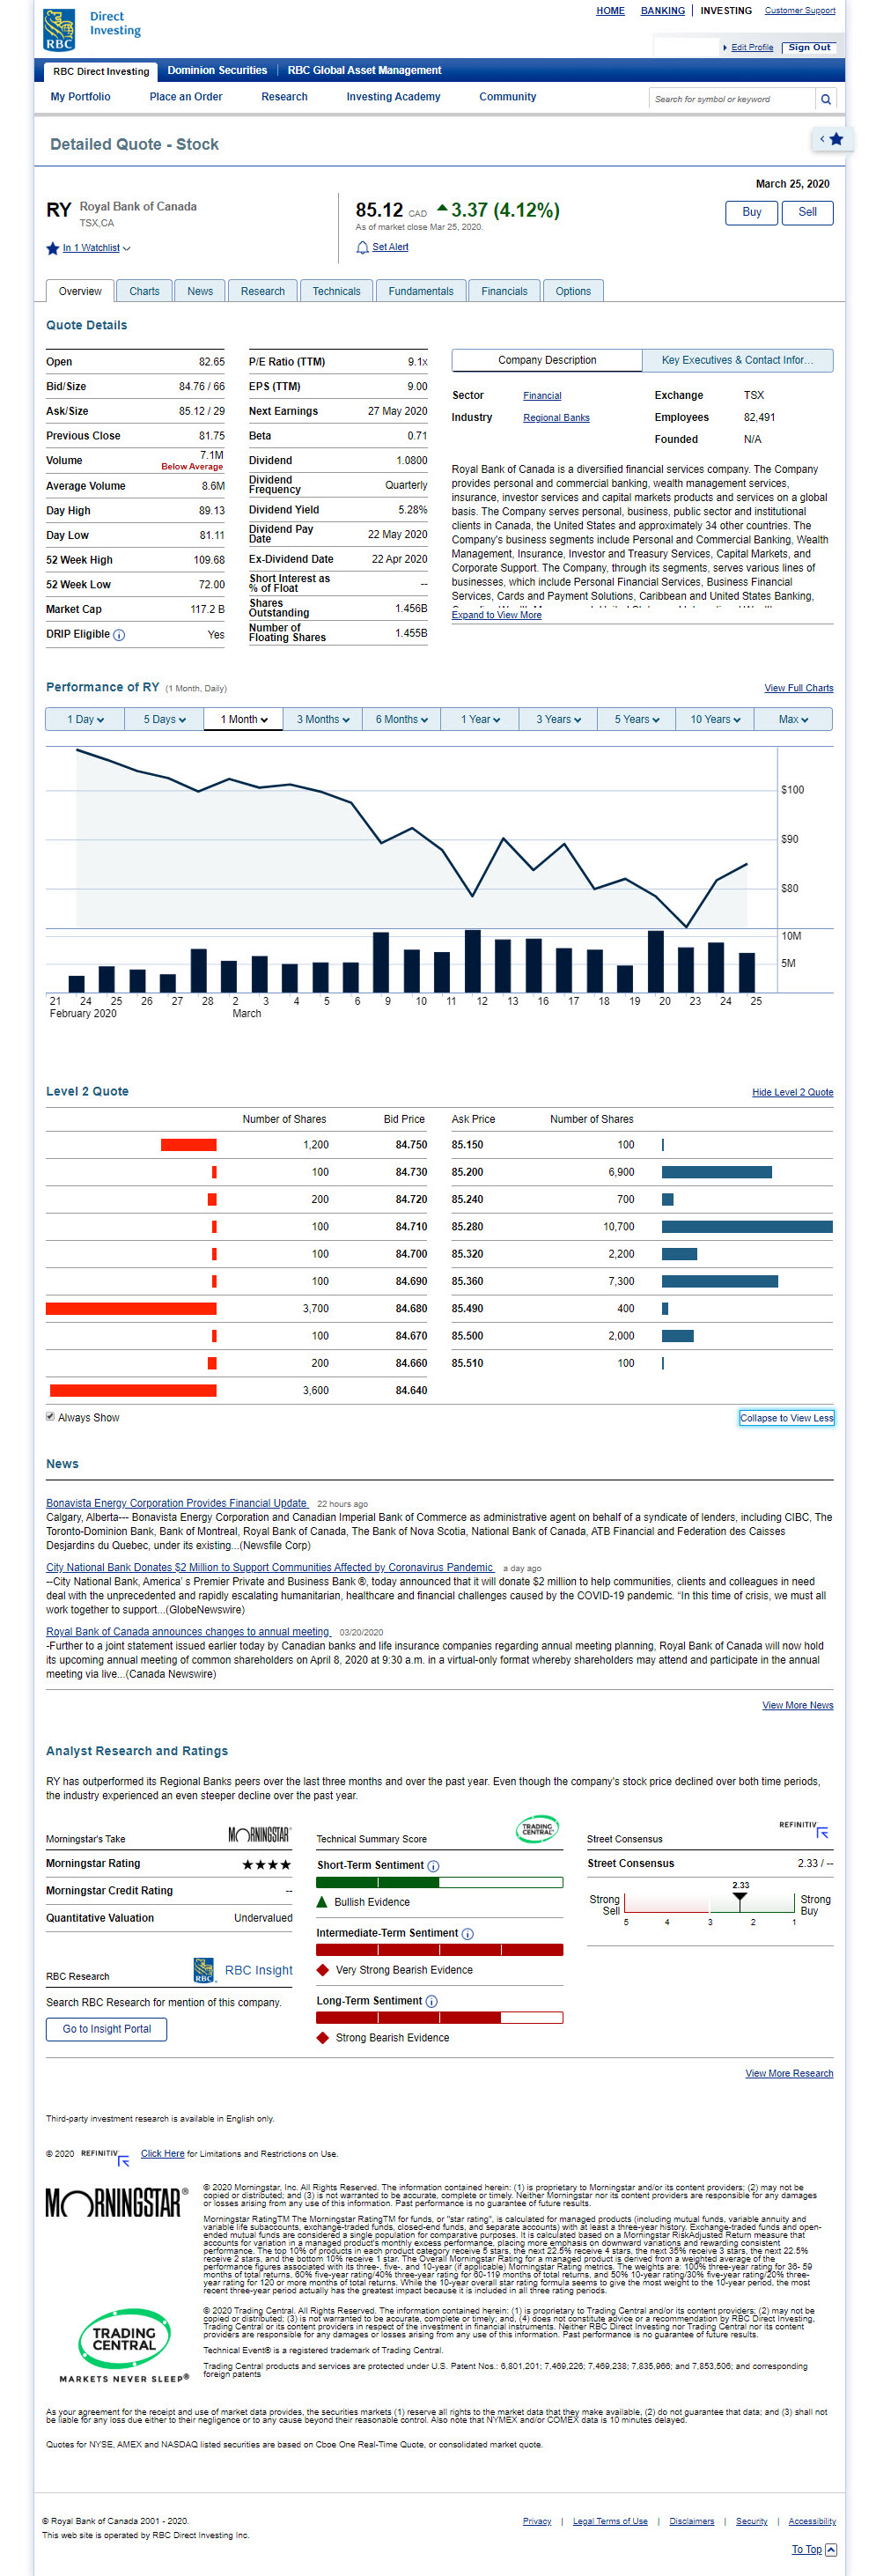 Sample screenshot of Real-Time Quote page Showing tabs, description, contact information, performance graph, level-2 quote, news, and analyst research and ratings.